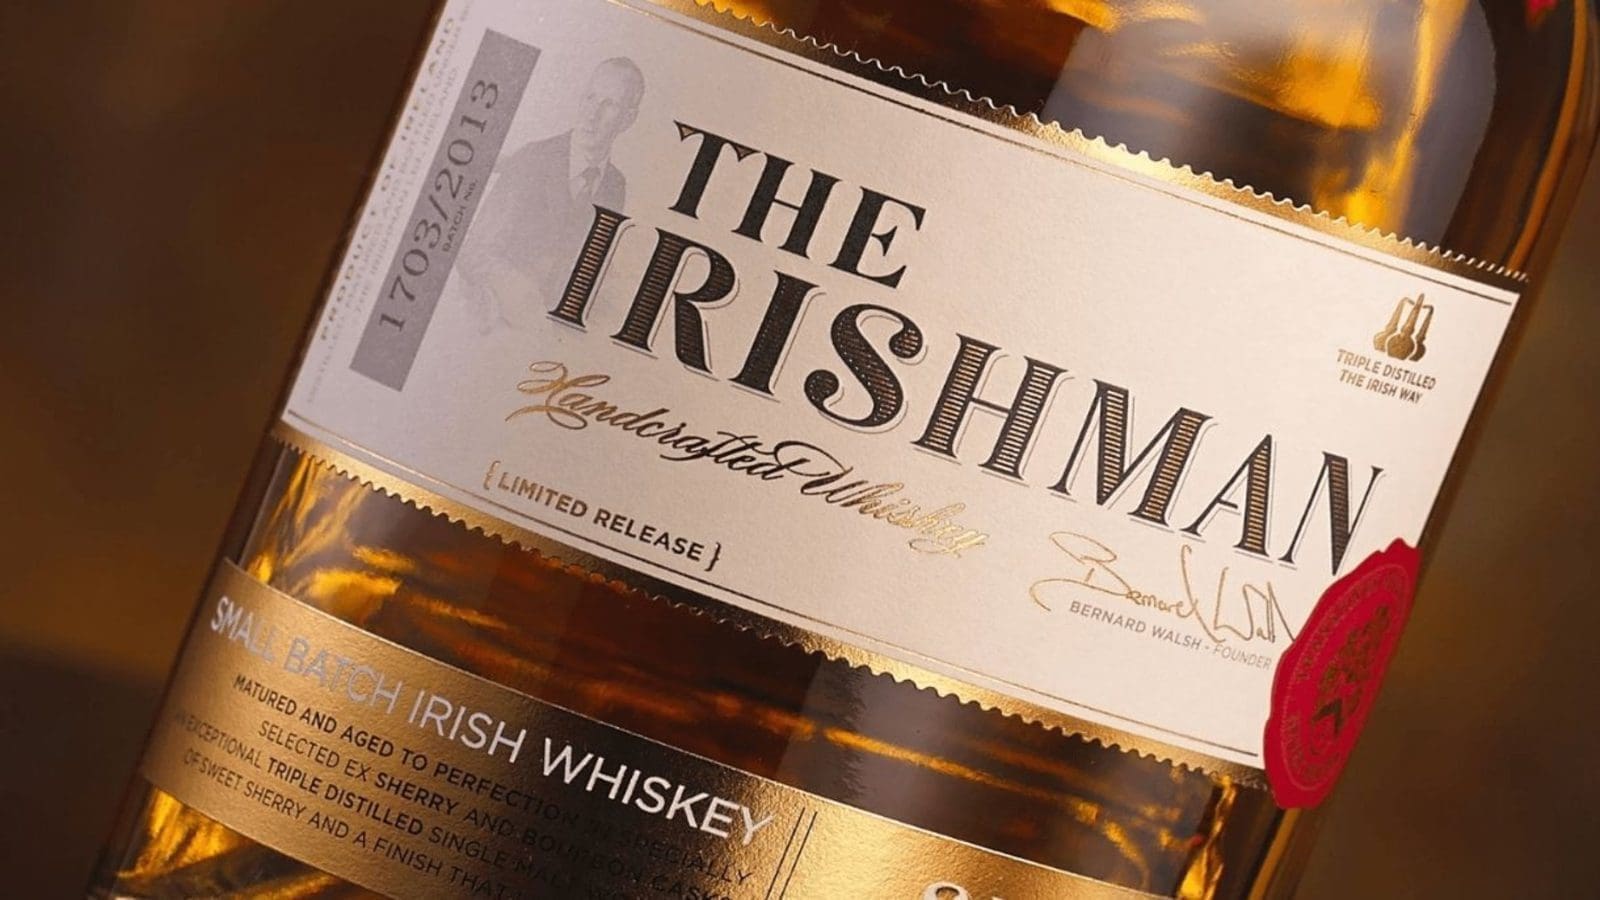 Amber Beverage Group expands into Irish Whiskey segment with acquisition of Walsh Whiskey